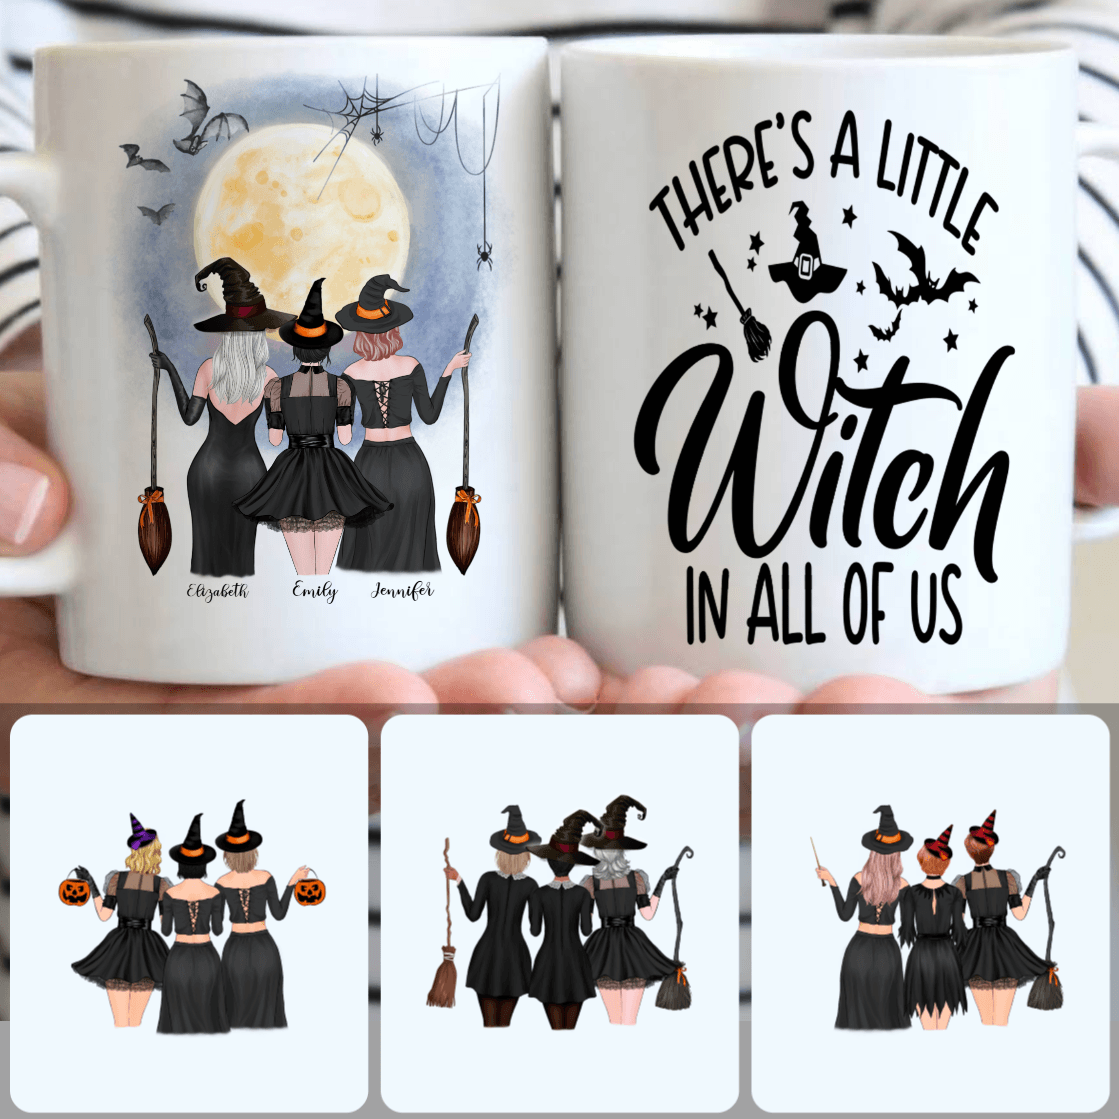 Personalized Mug, Unique Halloween Gifts, 3 Sisters - A Little Witch Customized Coffee Mug With Names